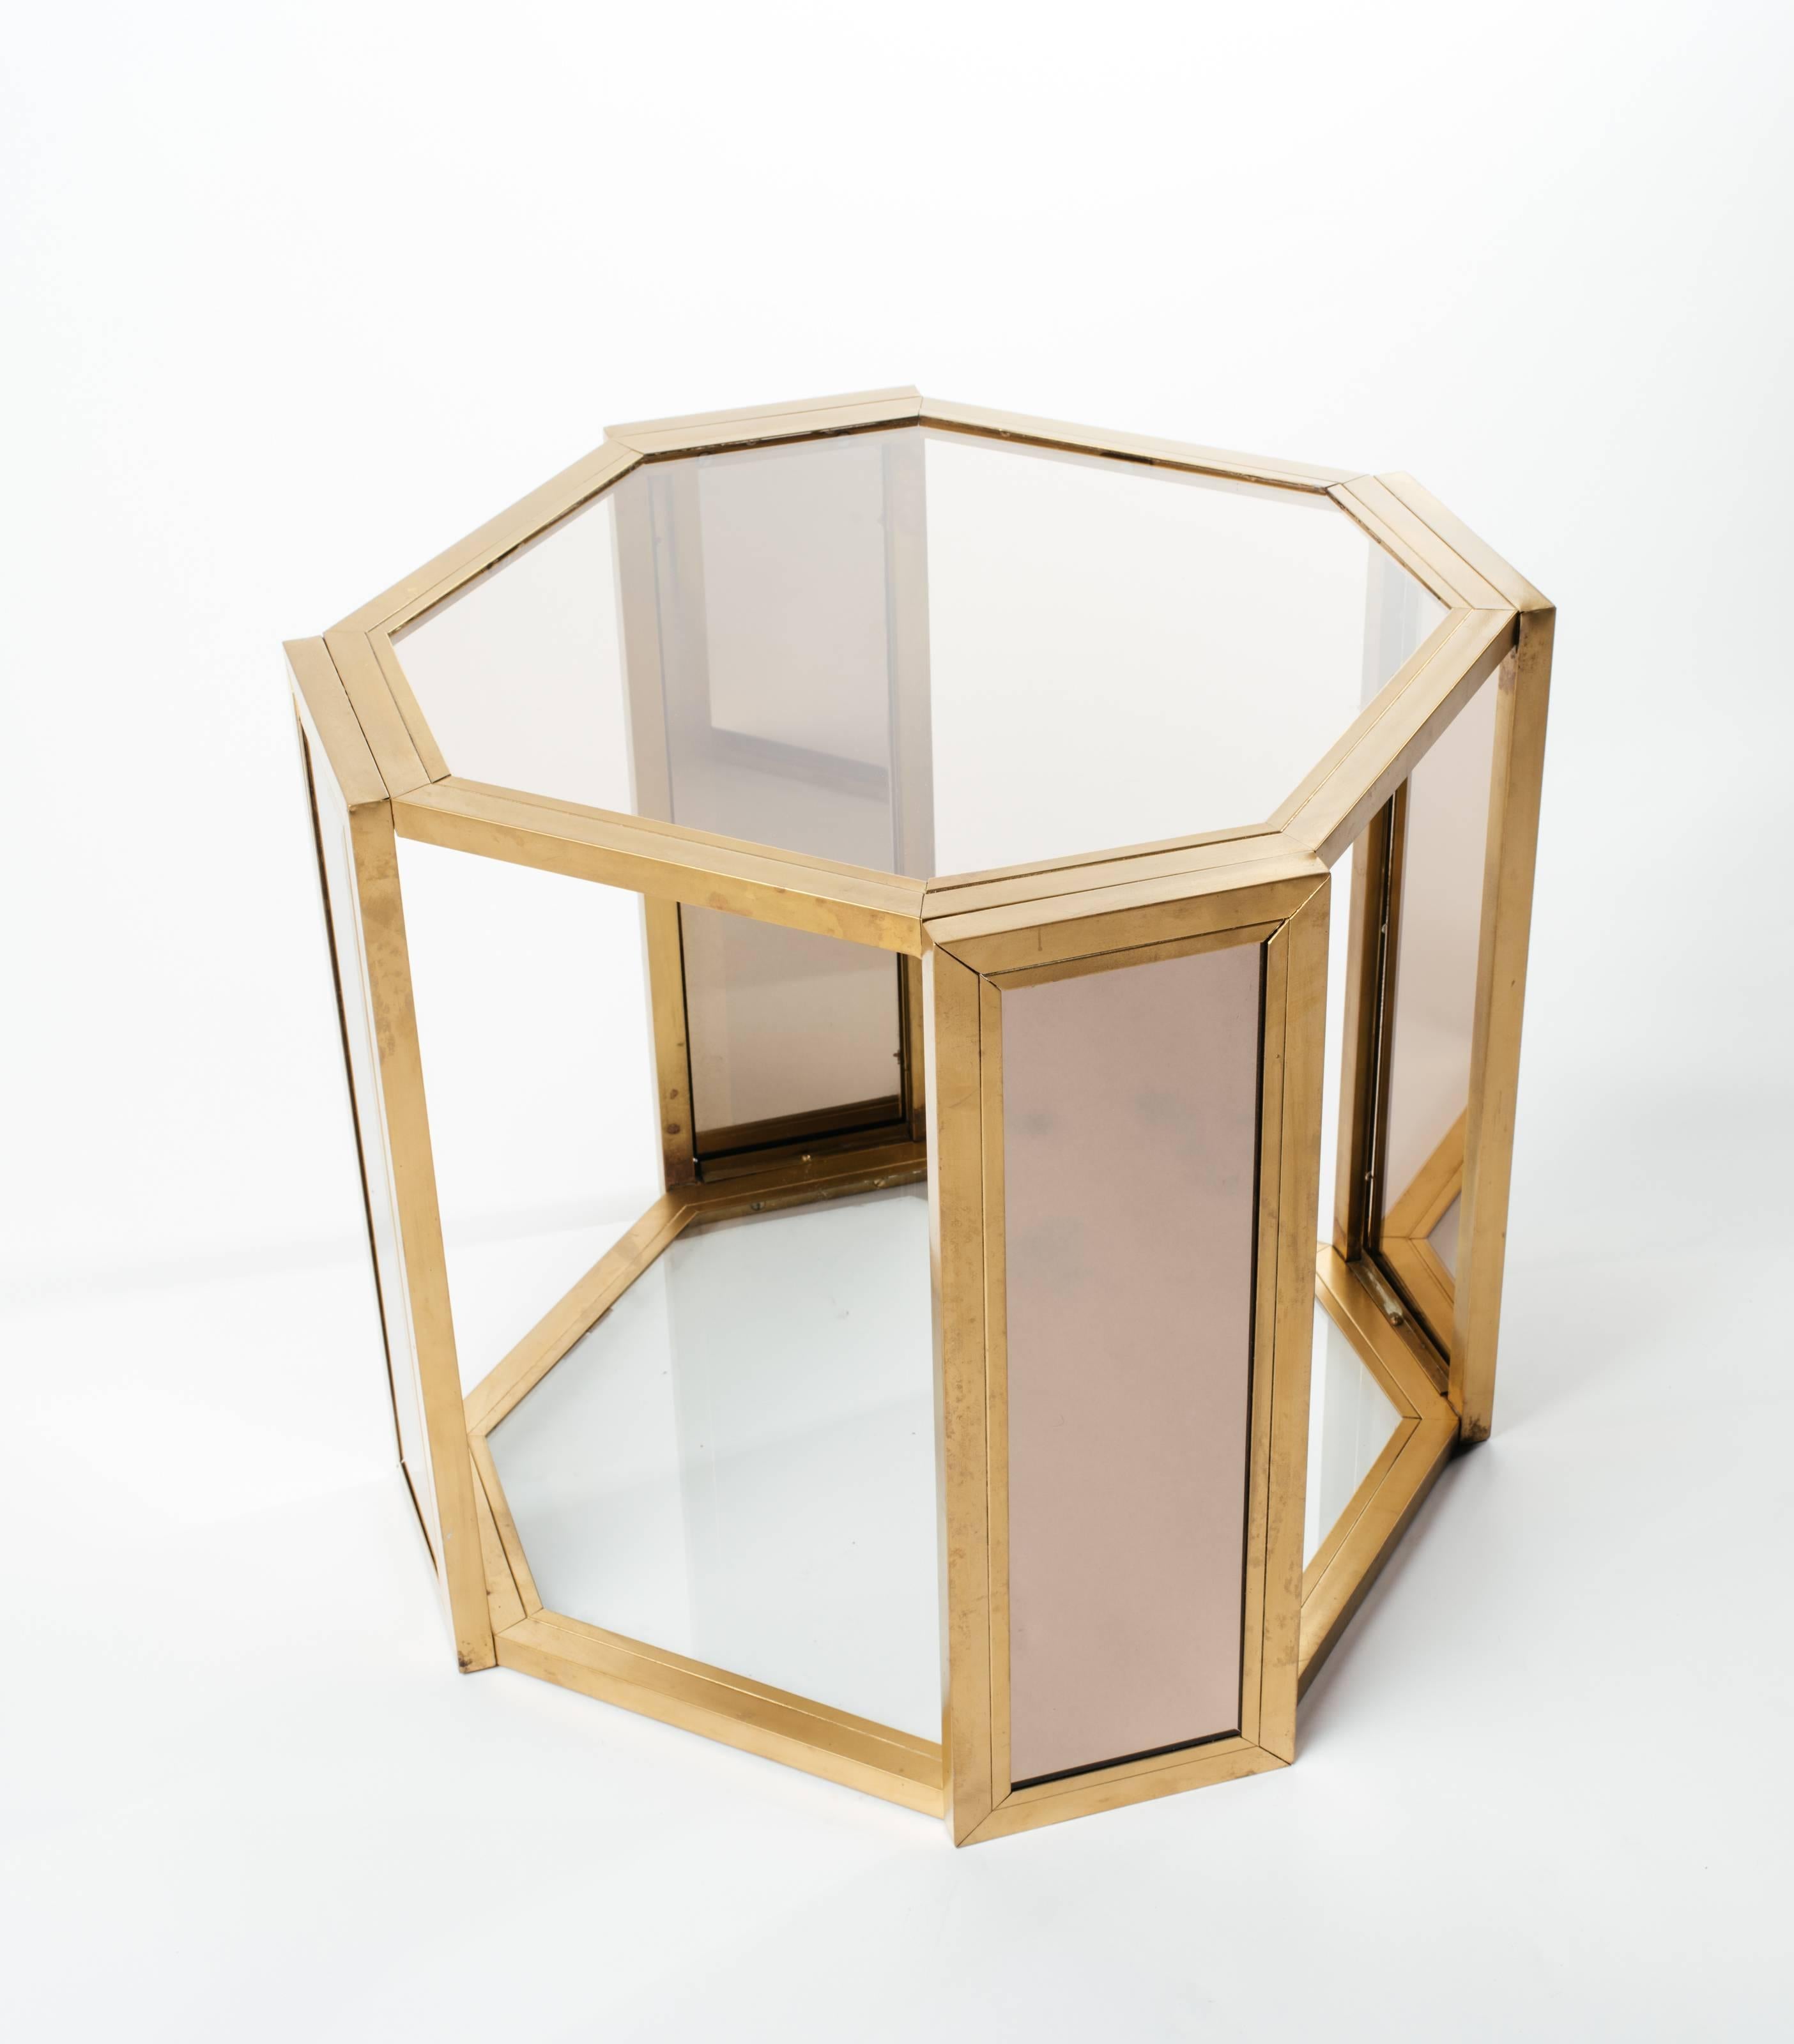 Pair of Hexagon Two Tier Side Tables in Brass and Smoked Glass, c. 1970s In Good Condition For Sale In Fort Lauderdale, FL